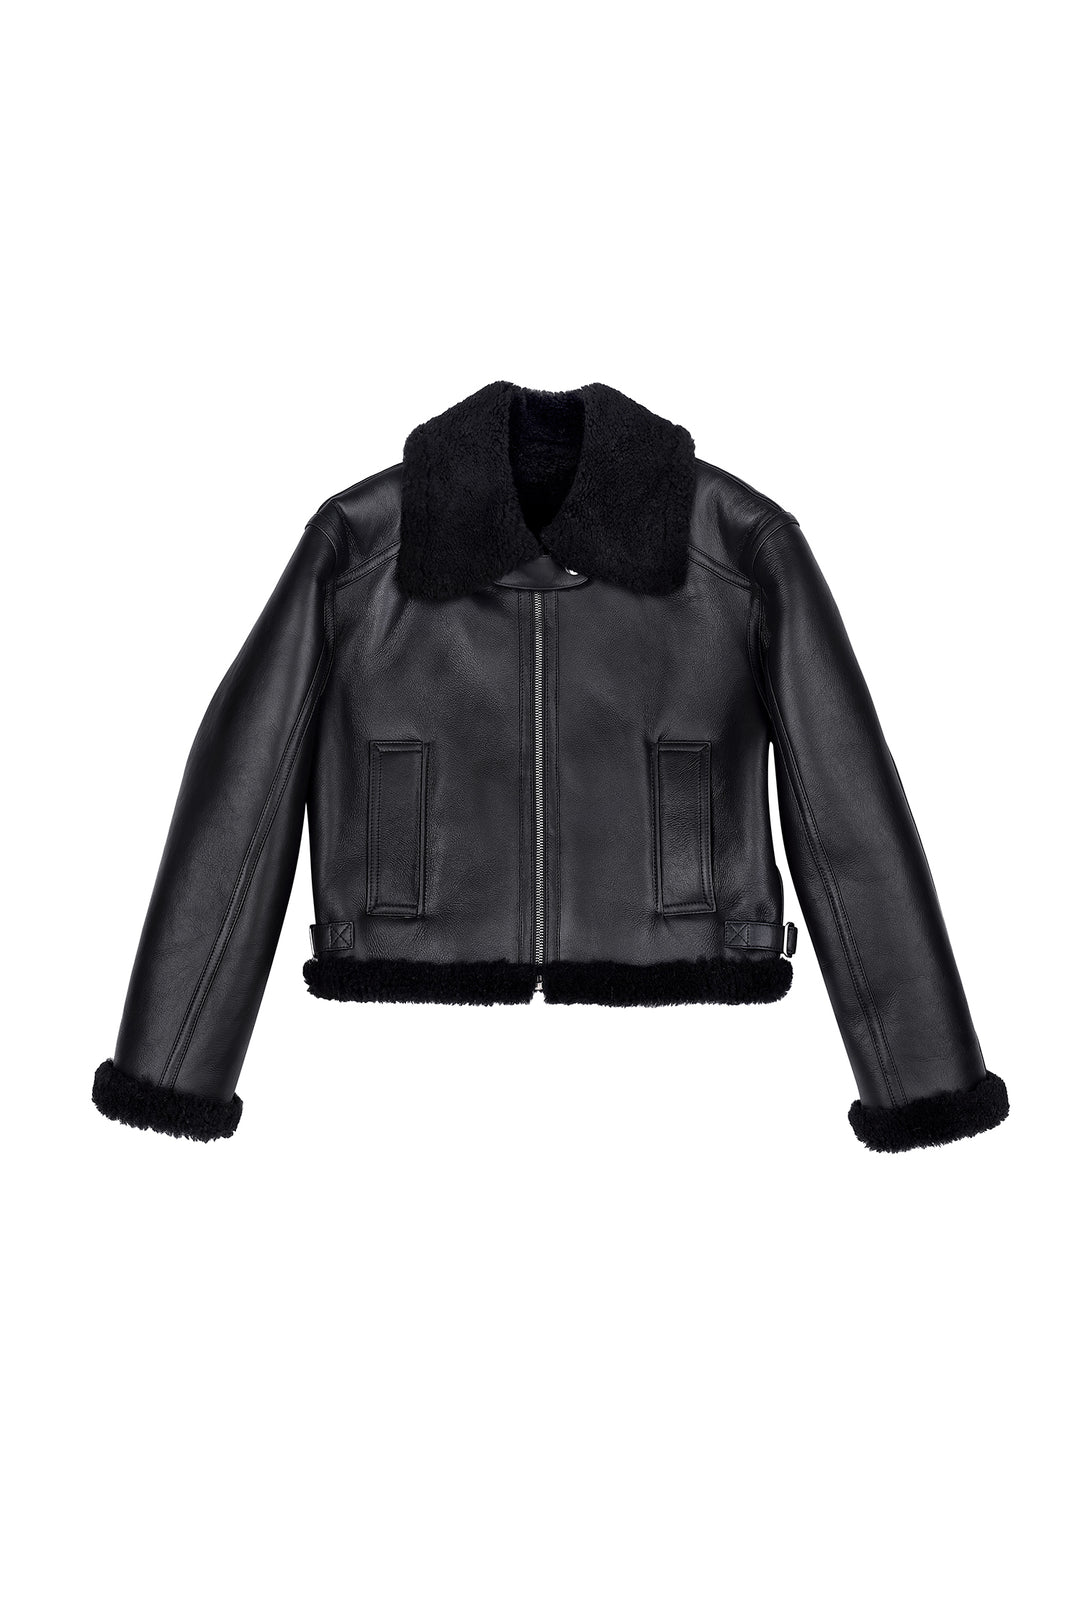 CROPPED SHEARLING JACKET IN BLACK COLOR